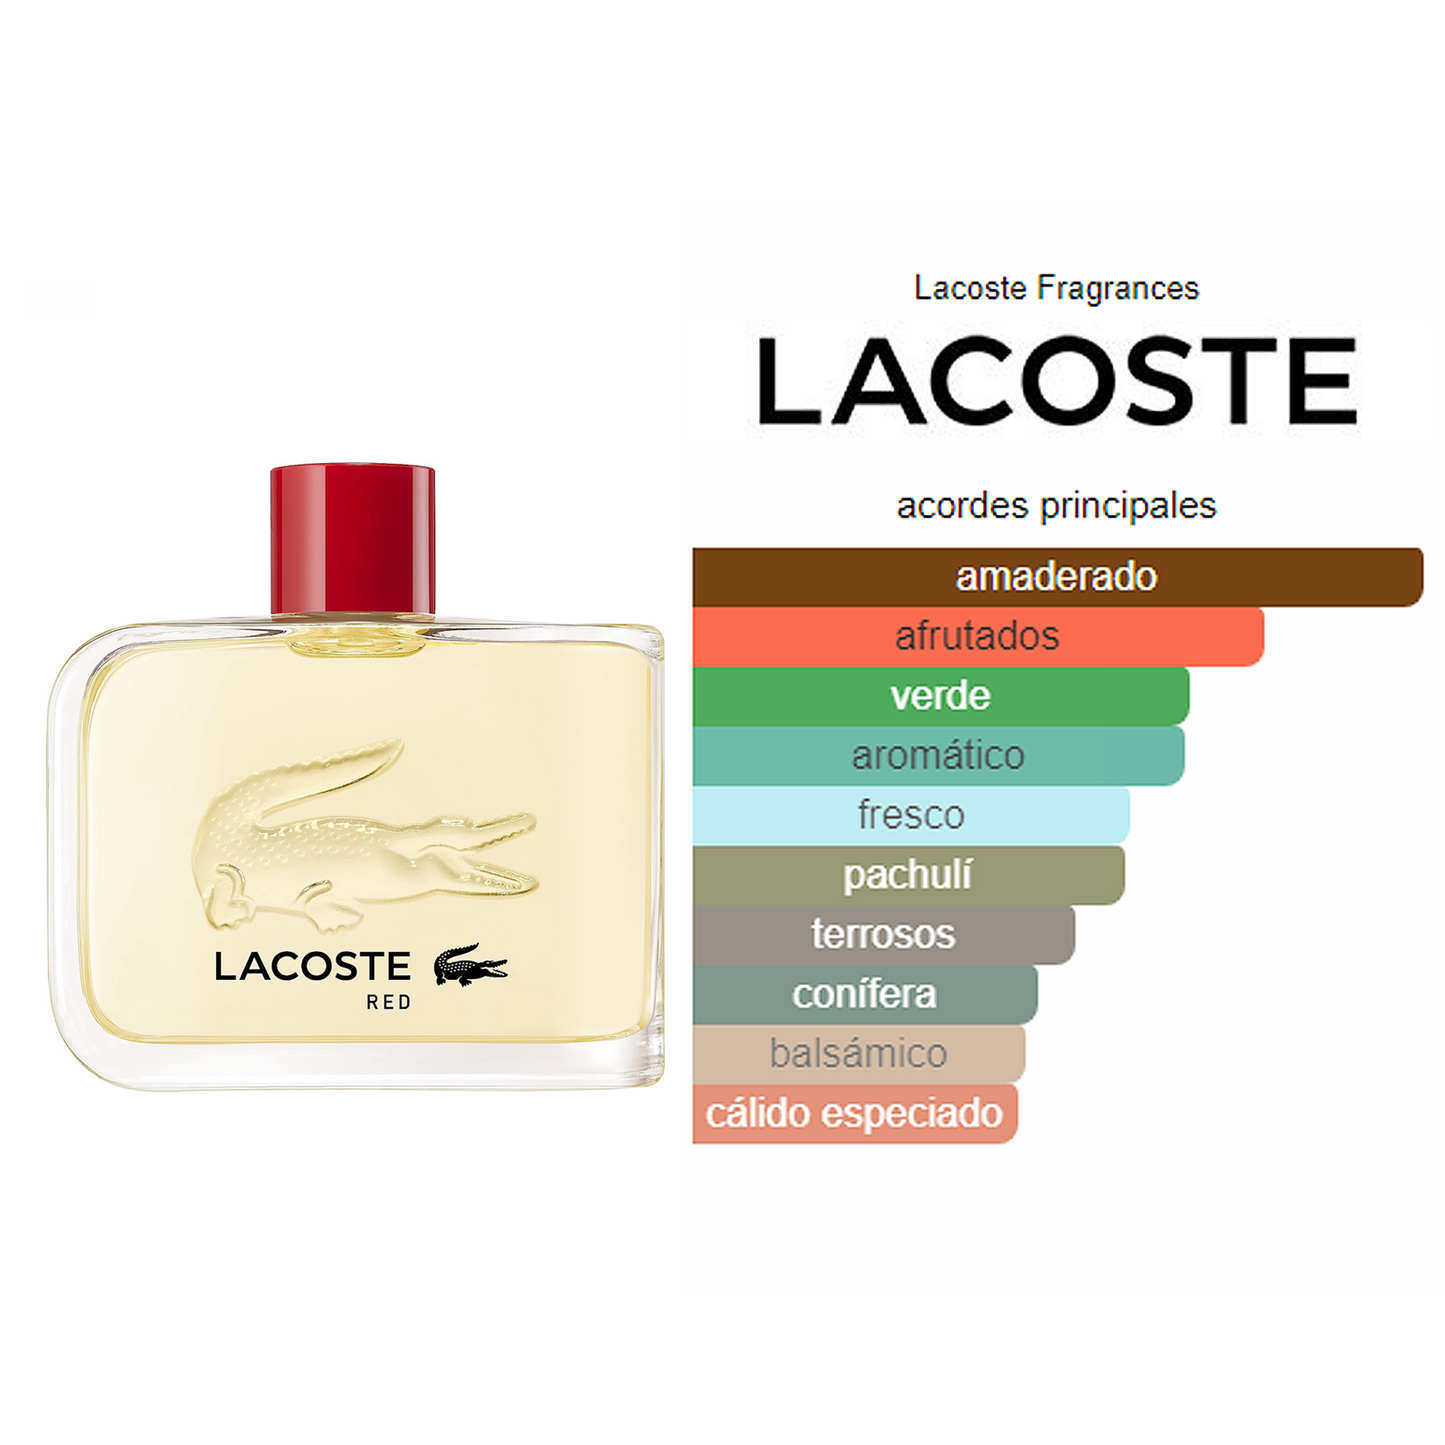 Perfume Red 125ml Edt  Para Hombre Marca Lacoste®